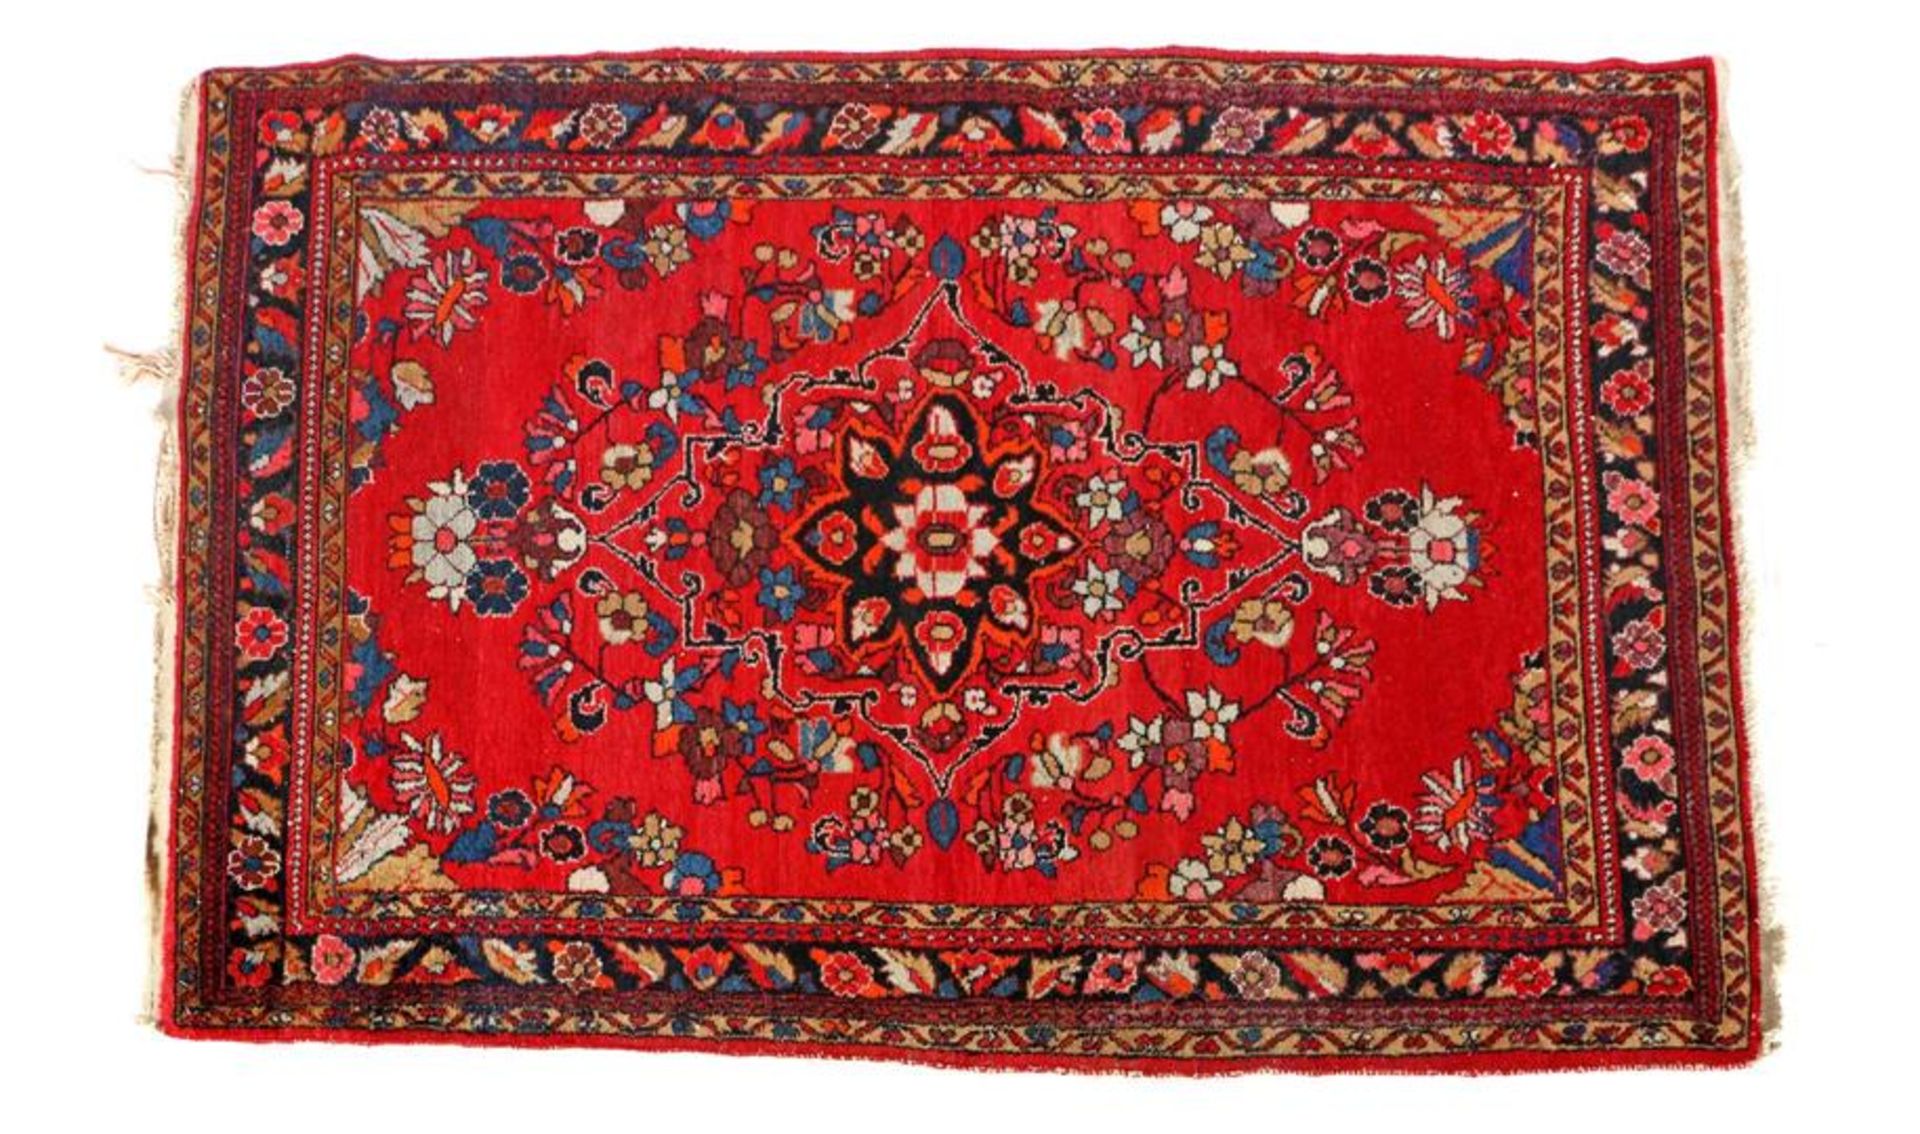 Hand-knotted Oriental rug, 205x132 cm